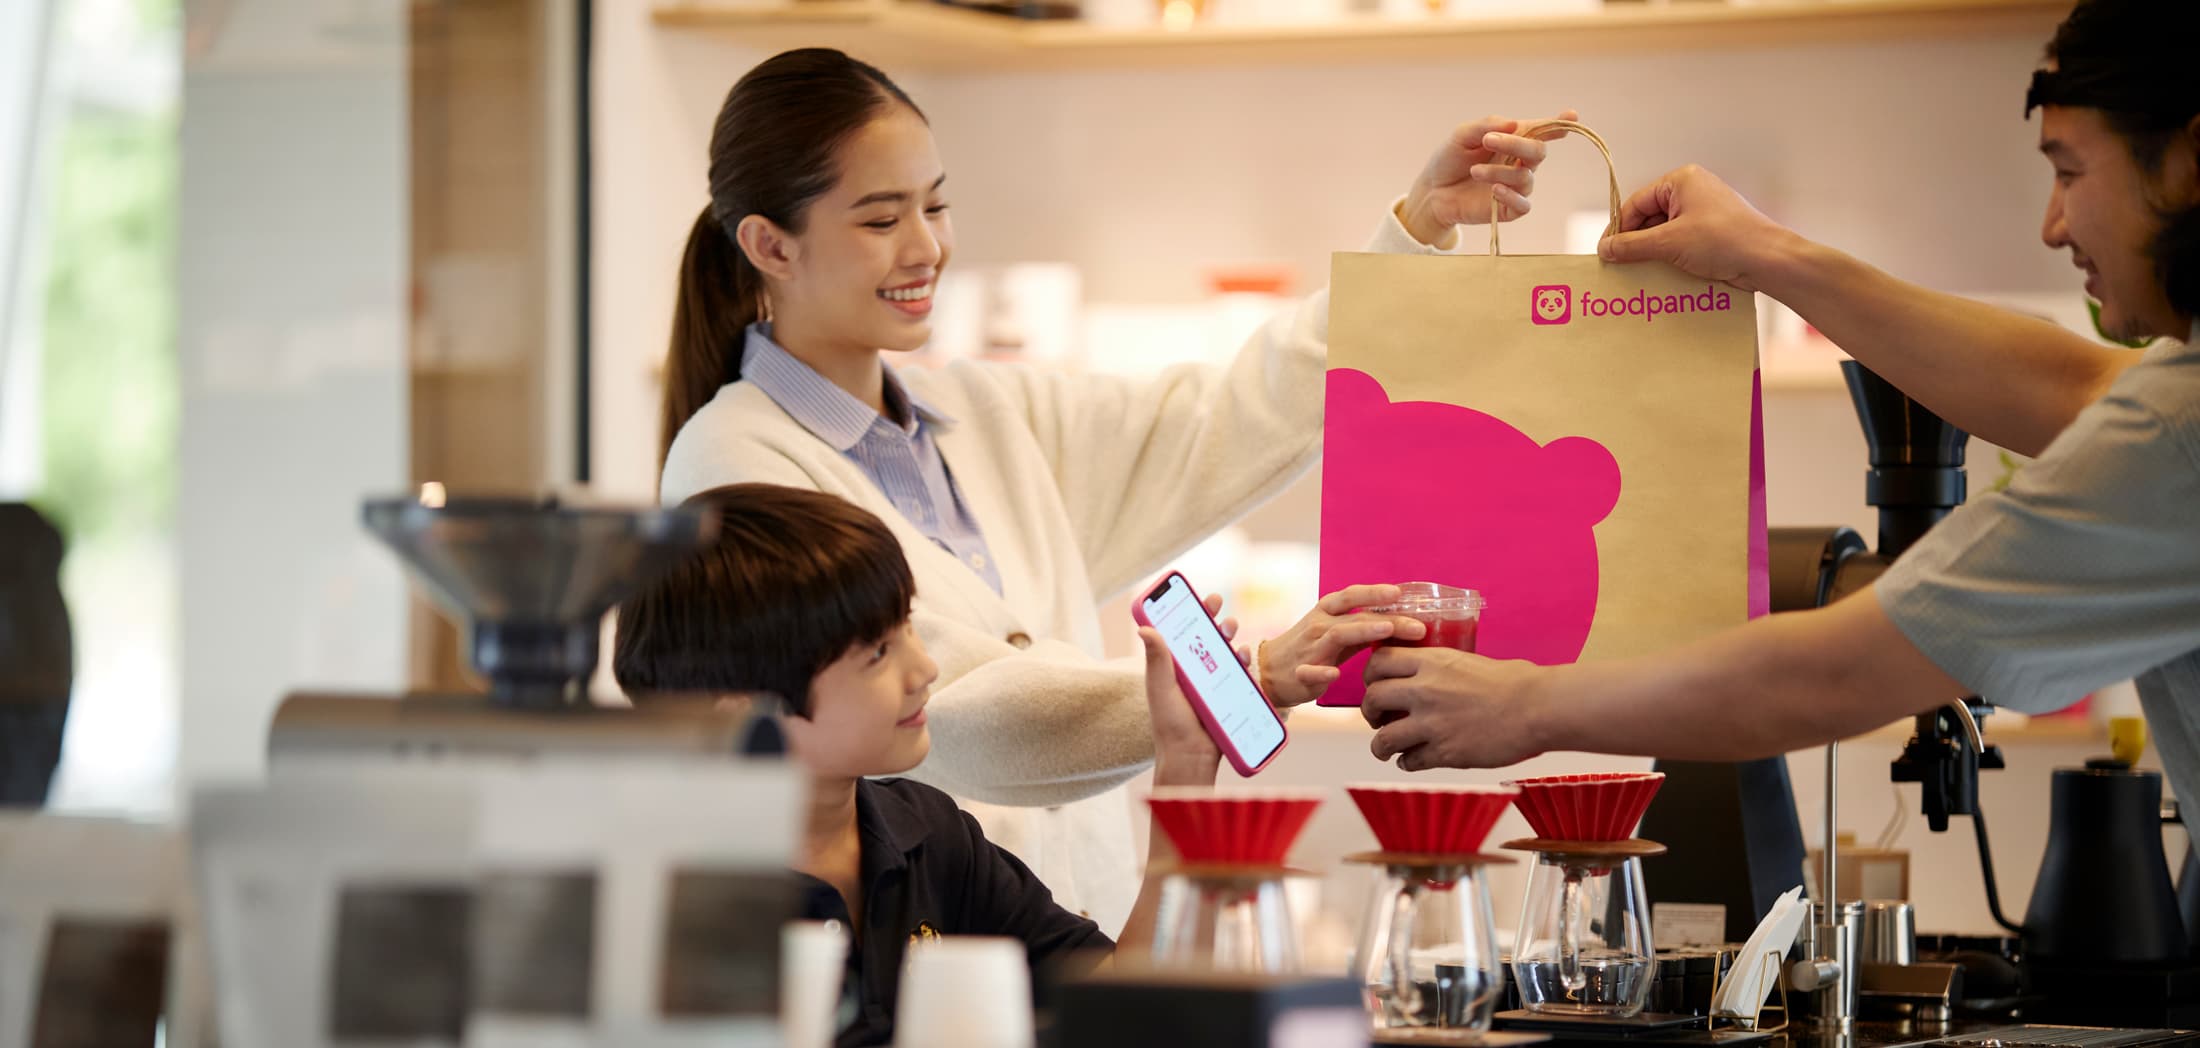 foodpanda introduces contactless delivery button during COVID-19